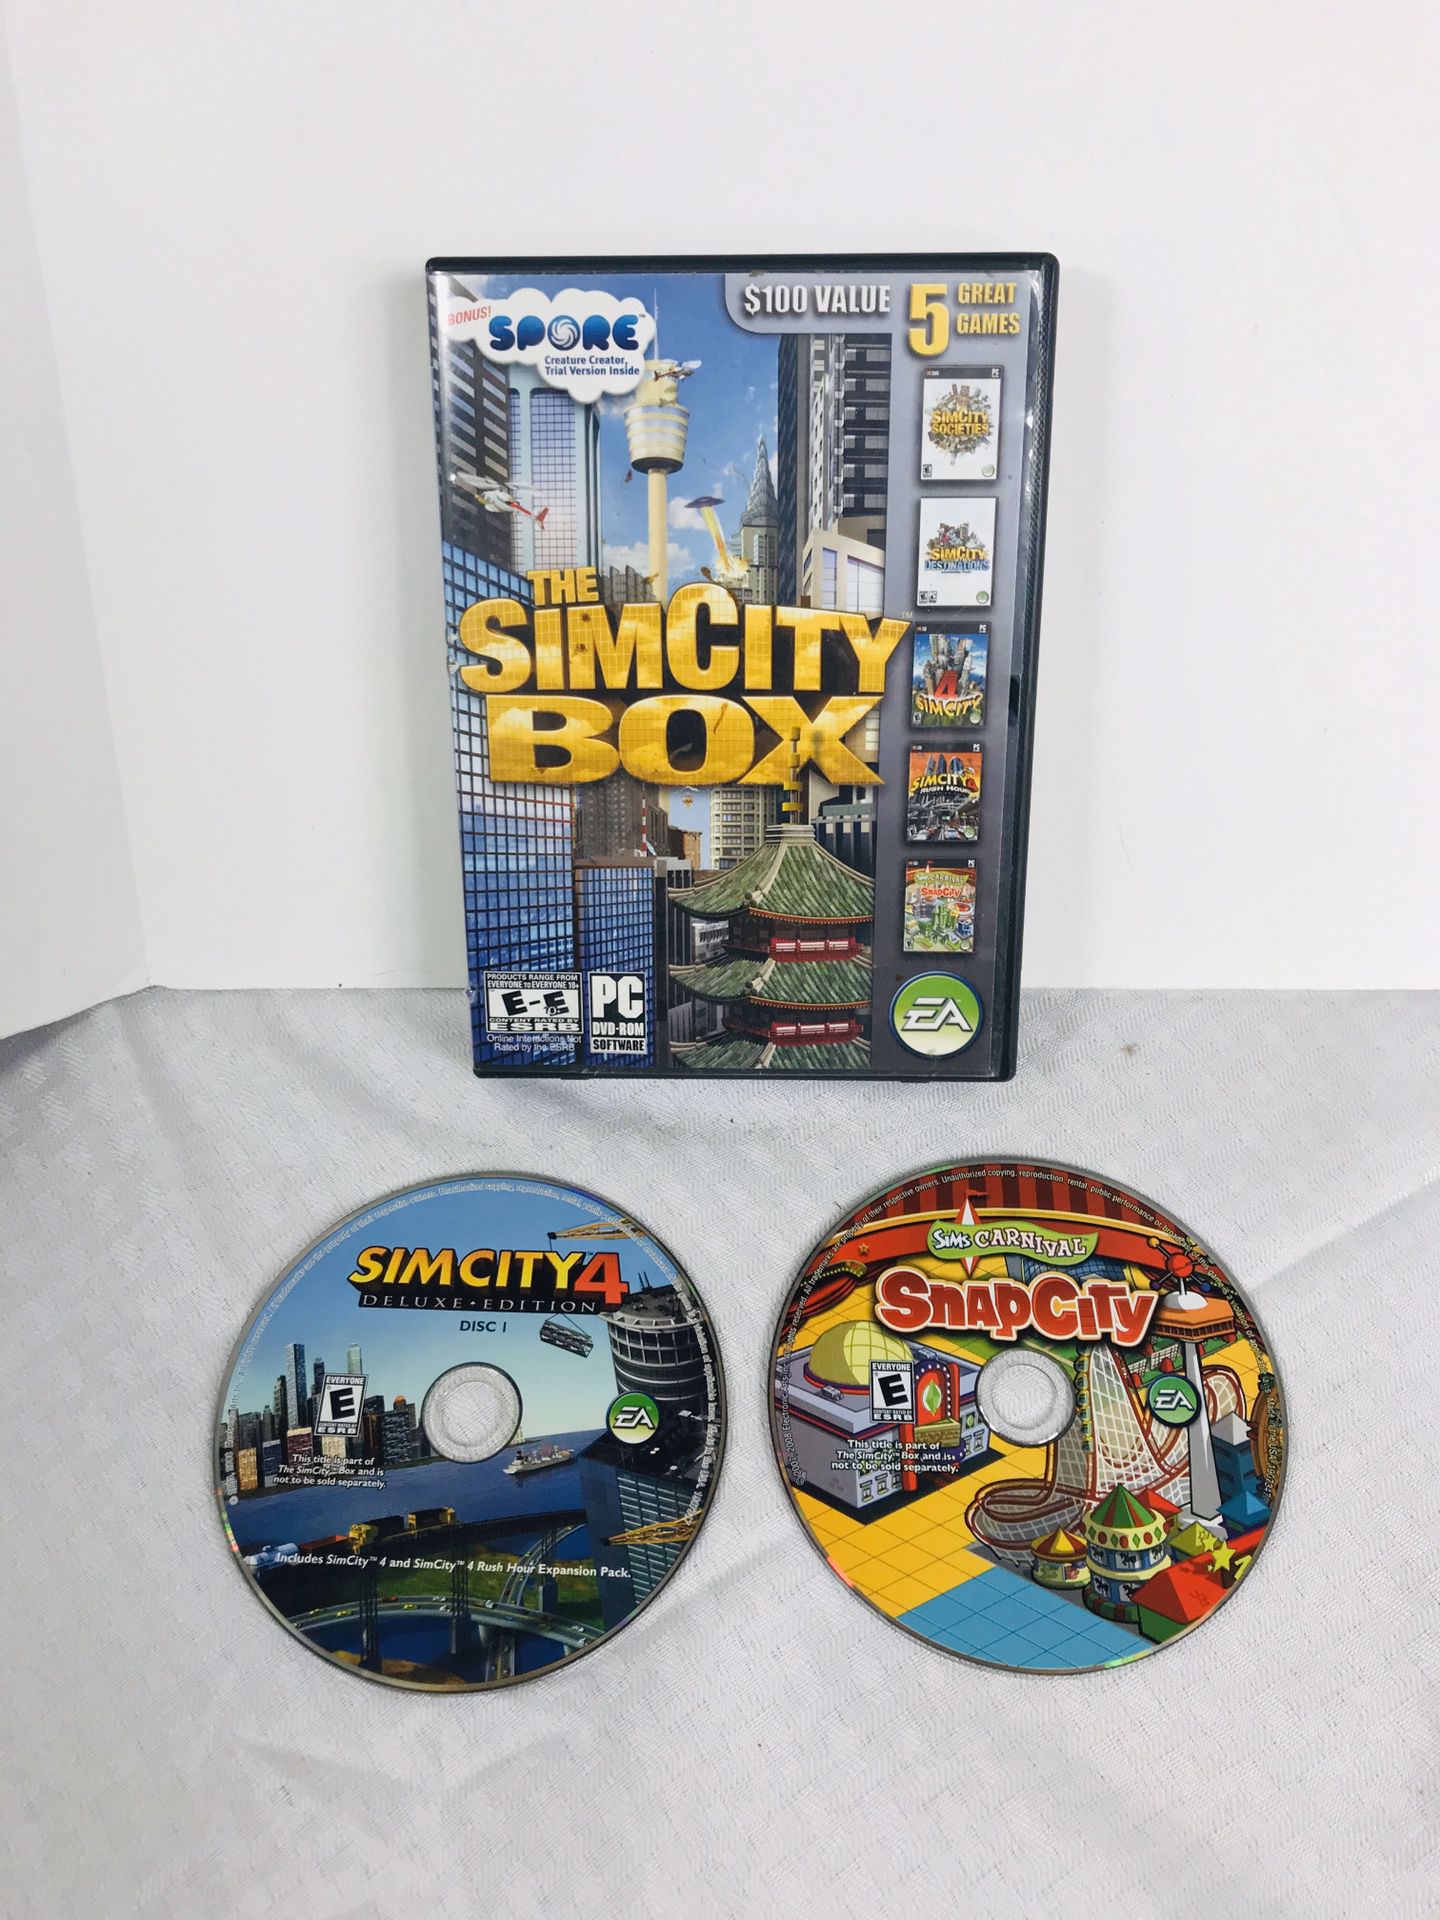 Sim City 4 Deluxe Edition & Sims Carnival SnapCity PC Games Lot